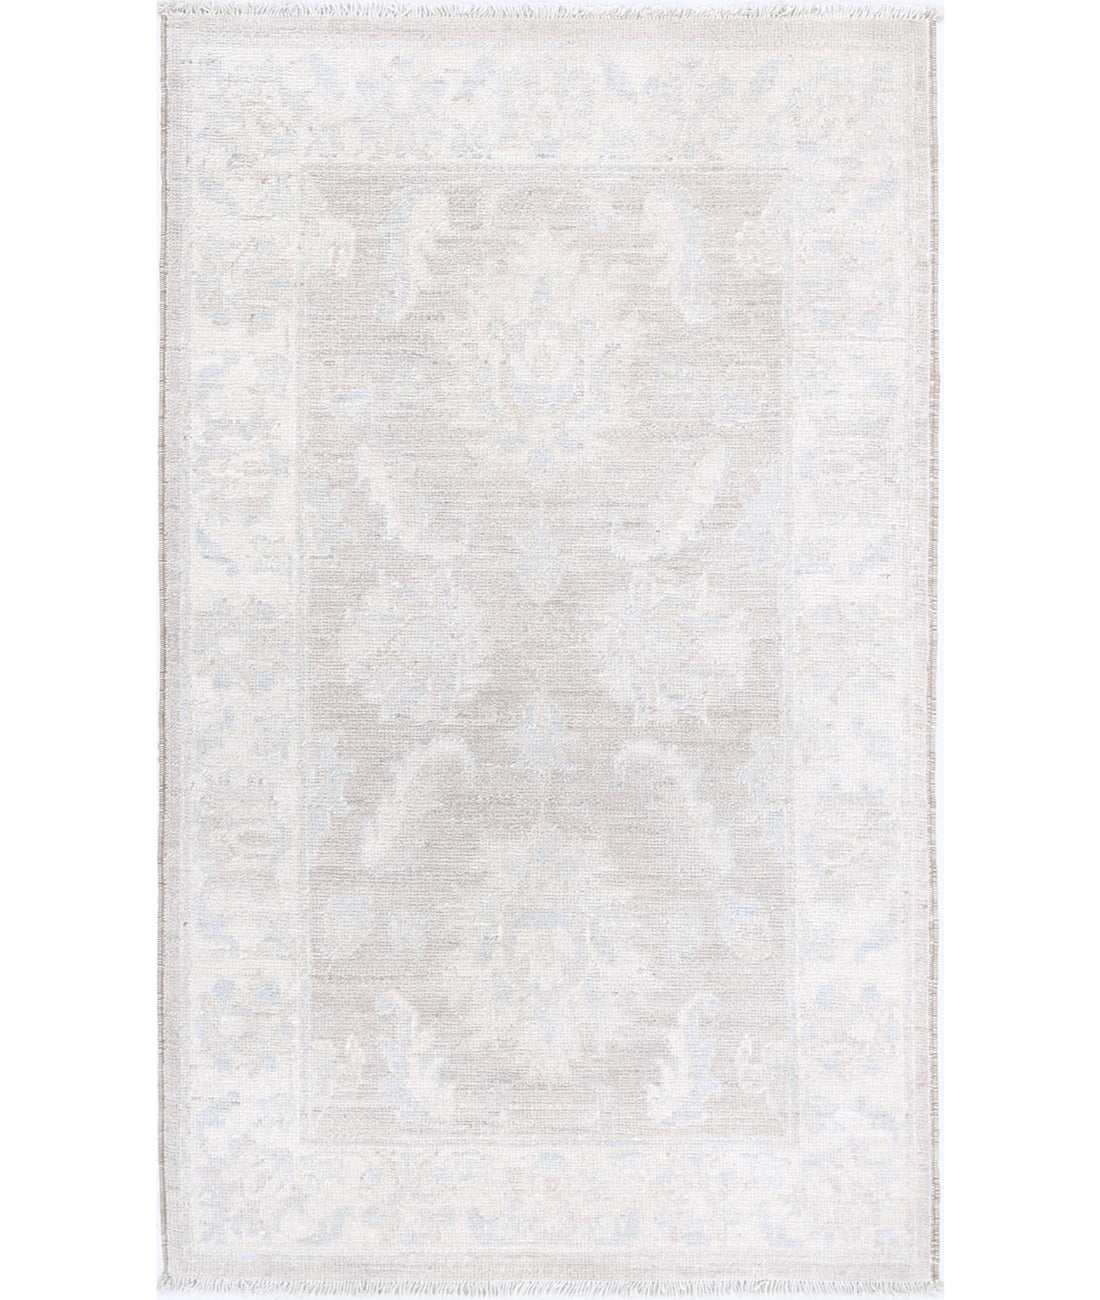 Hand Knotted Serenity Wool Rug - 2'0'' x 3'4'' 2'0'' x 3'4'' (60 X 100) / Brown / Ivory